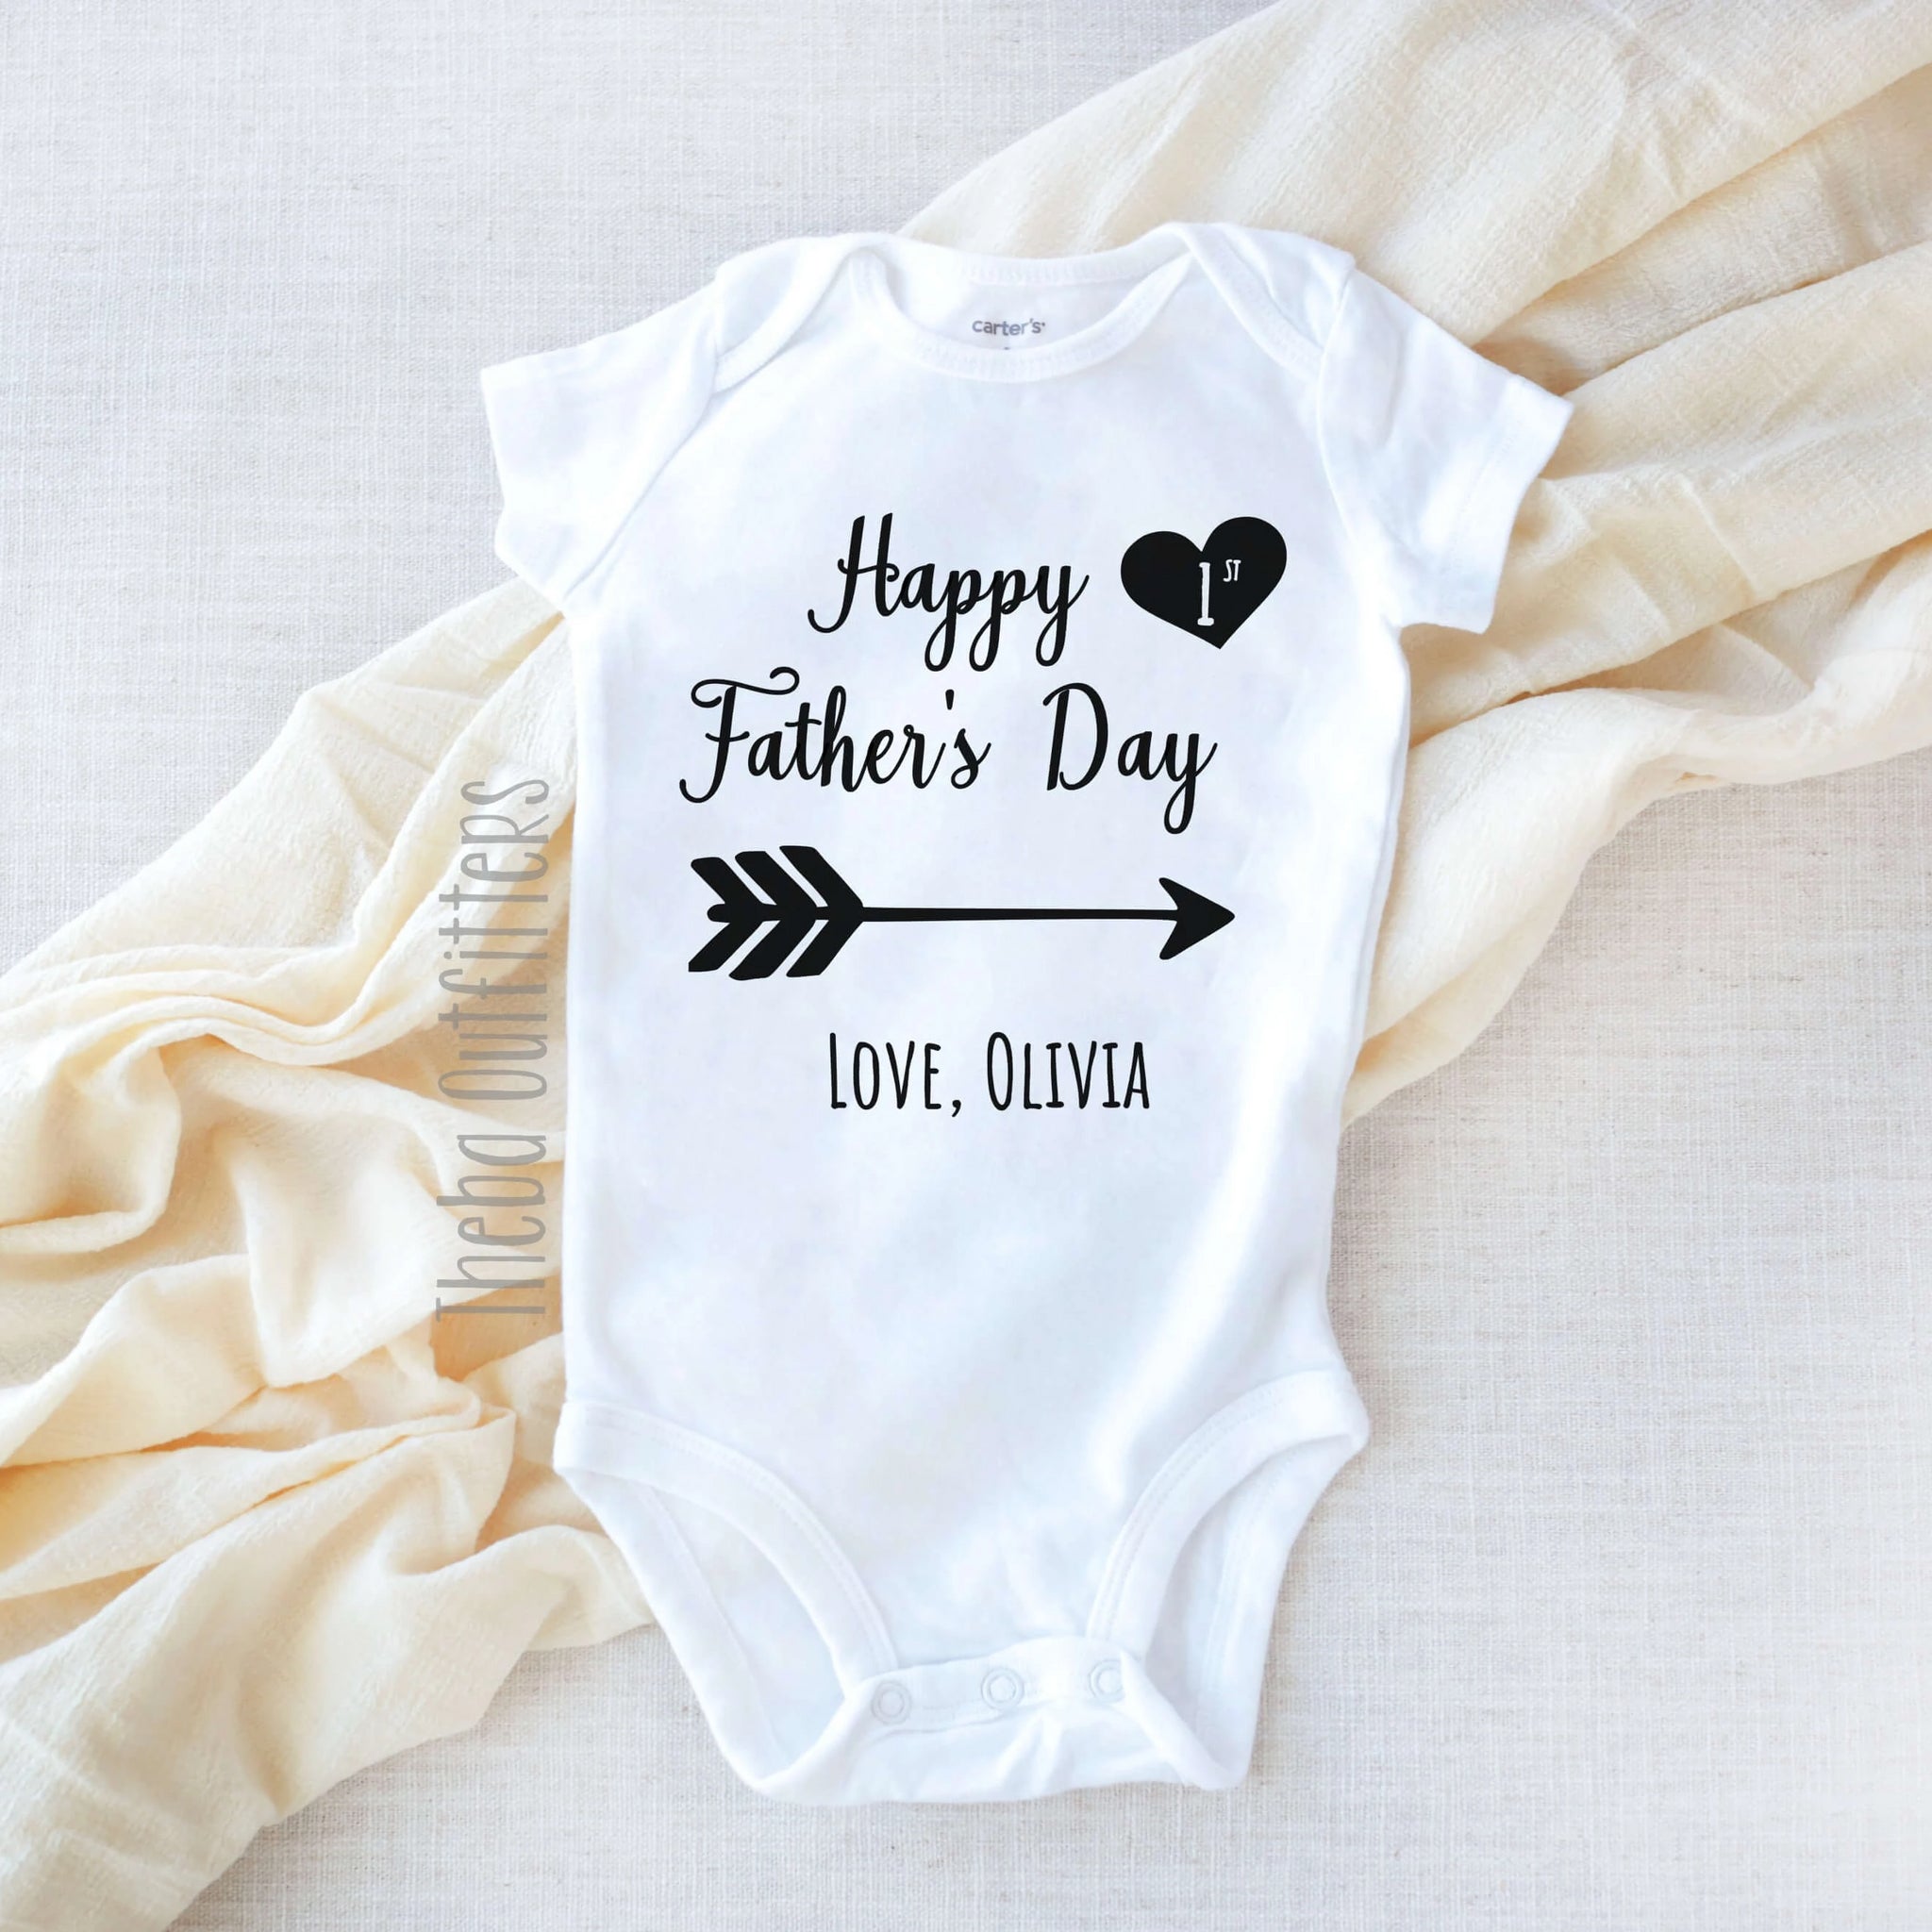 Happy First Father's Day Personalized Baby Onesie Bodysuit Infant Theba Outfitters